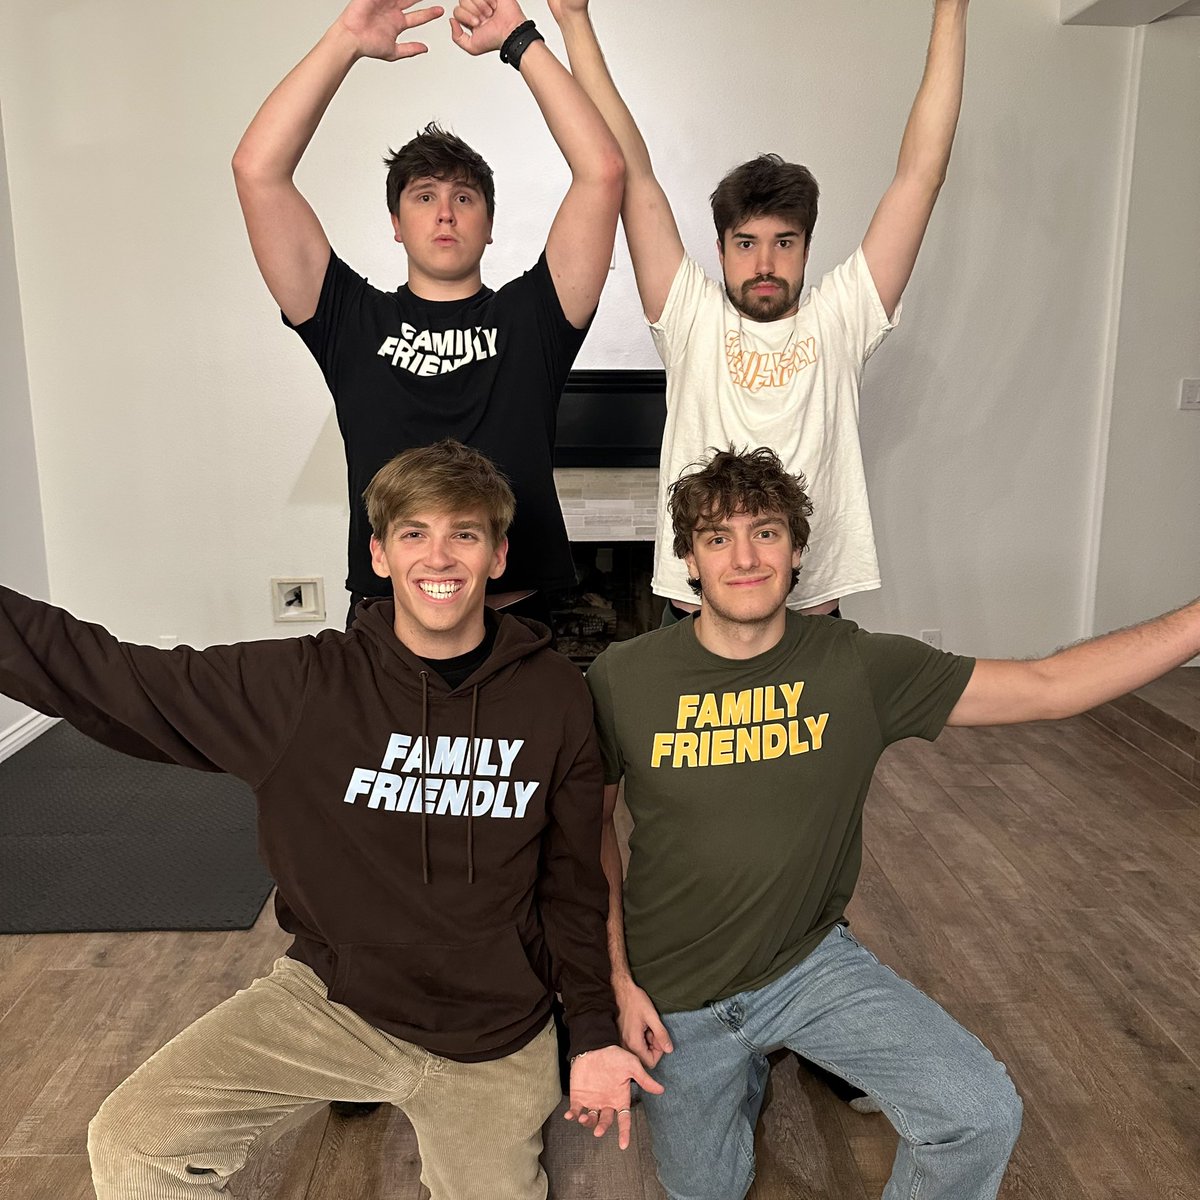 Looking for 1 beautiful woman to do a funny video where us 4 men compete for your love. Video will get 1M views minimum. Recording next Sunday, March 3rd, from 2pm pst to 8pm pst on discord. Must have computer, facecam, mic, and be 18+ beautiful woman. Reply or dm.